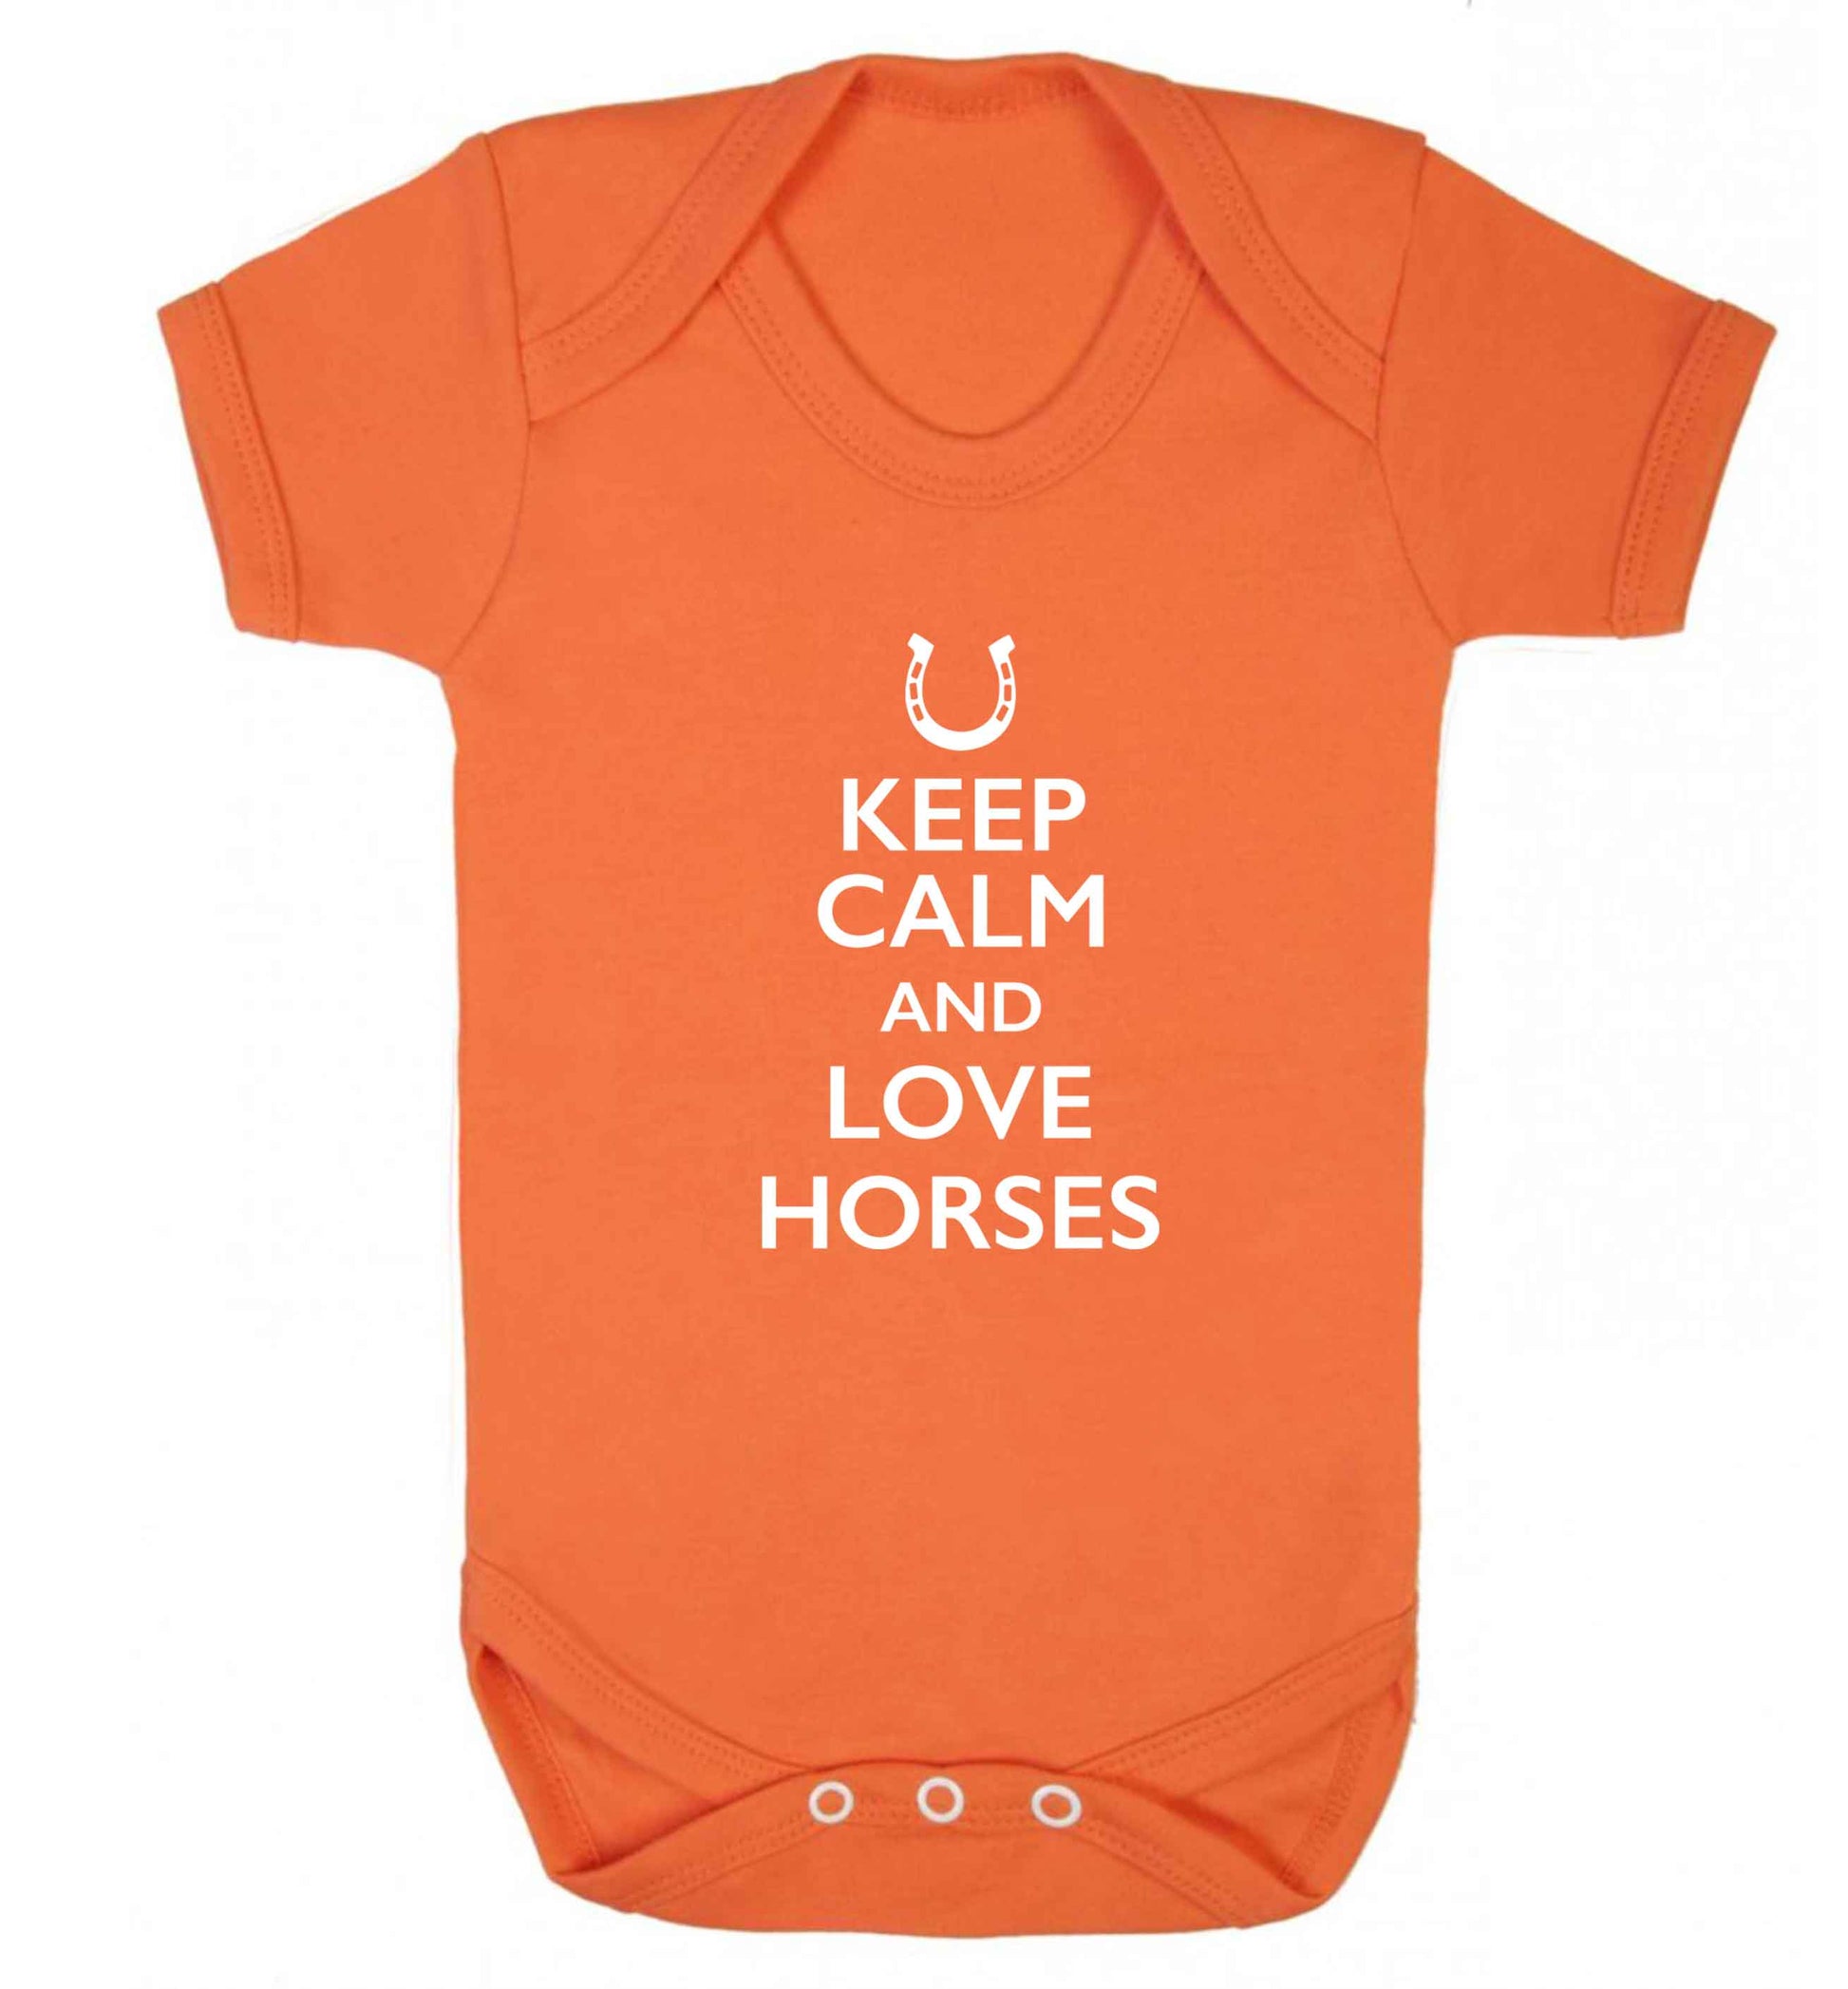 Keep calm and love horses baby vest orange 18-24 months